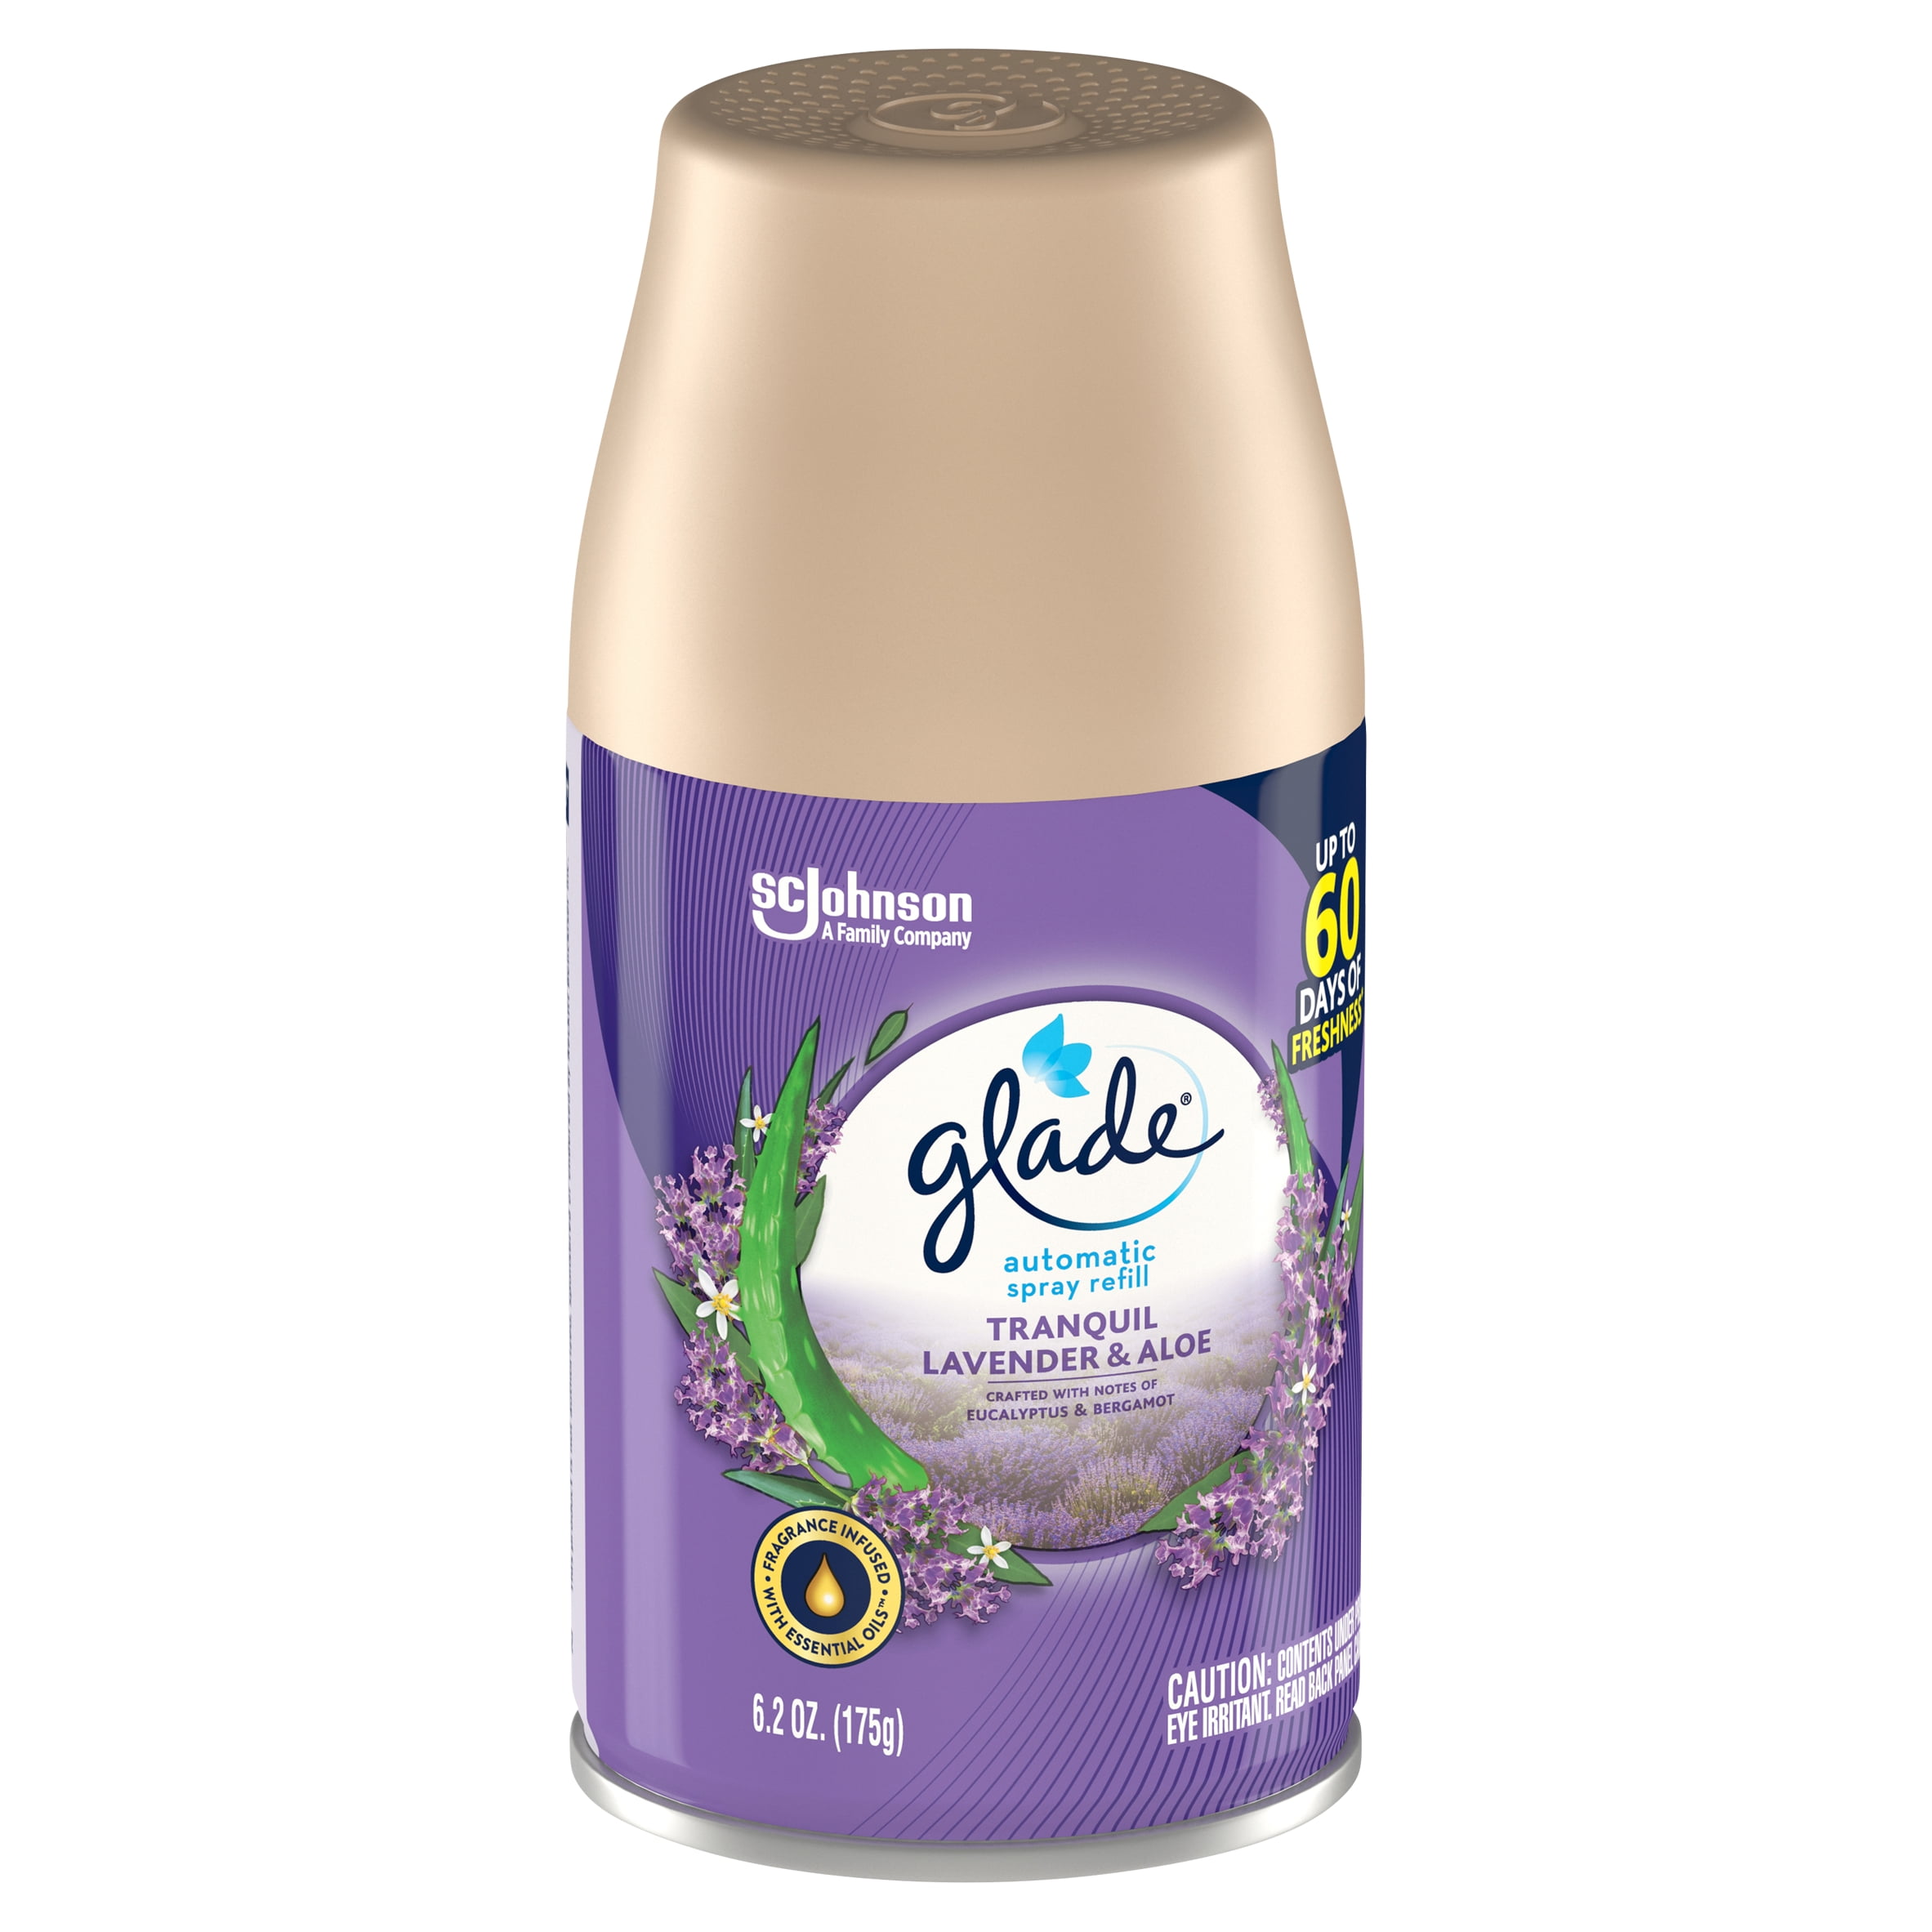 Glade Automatic Spray 269ml Refills Choose any 3 from 20 Different Aroma's  Biggest collection of Glade Aroma best for home freshness or for giving  gifts sold by shanza departmental's : : Grocery